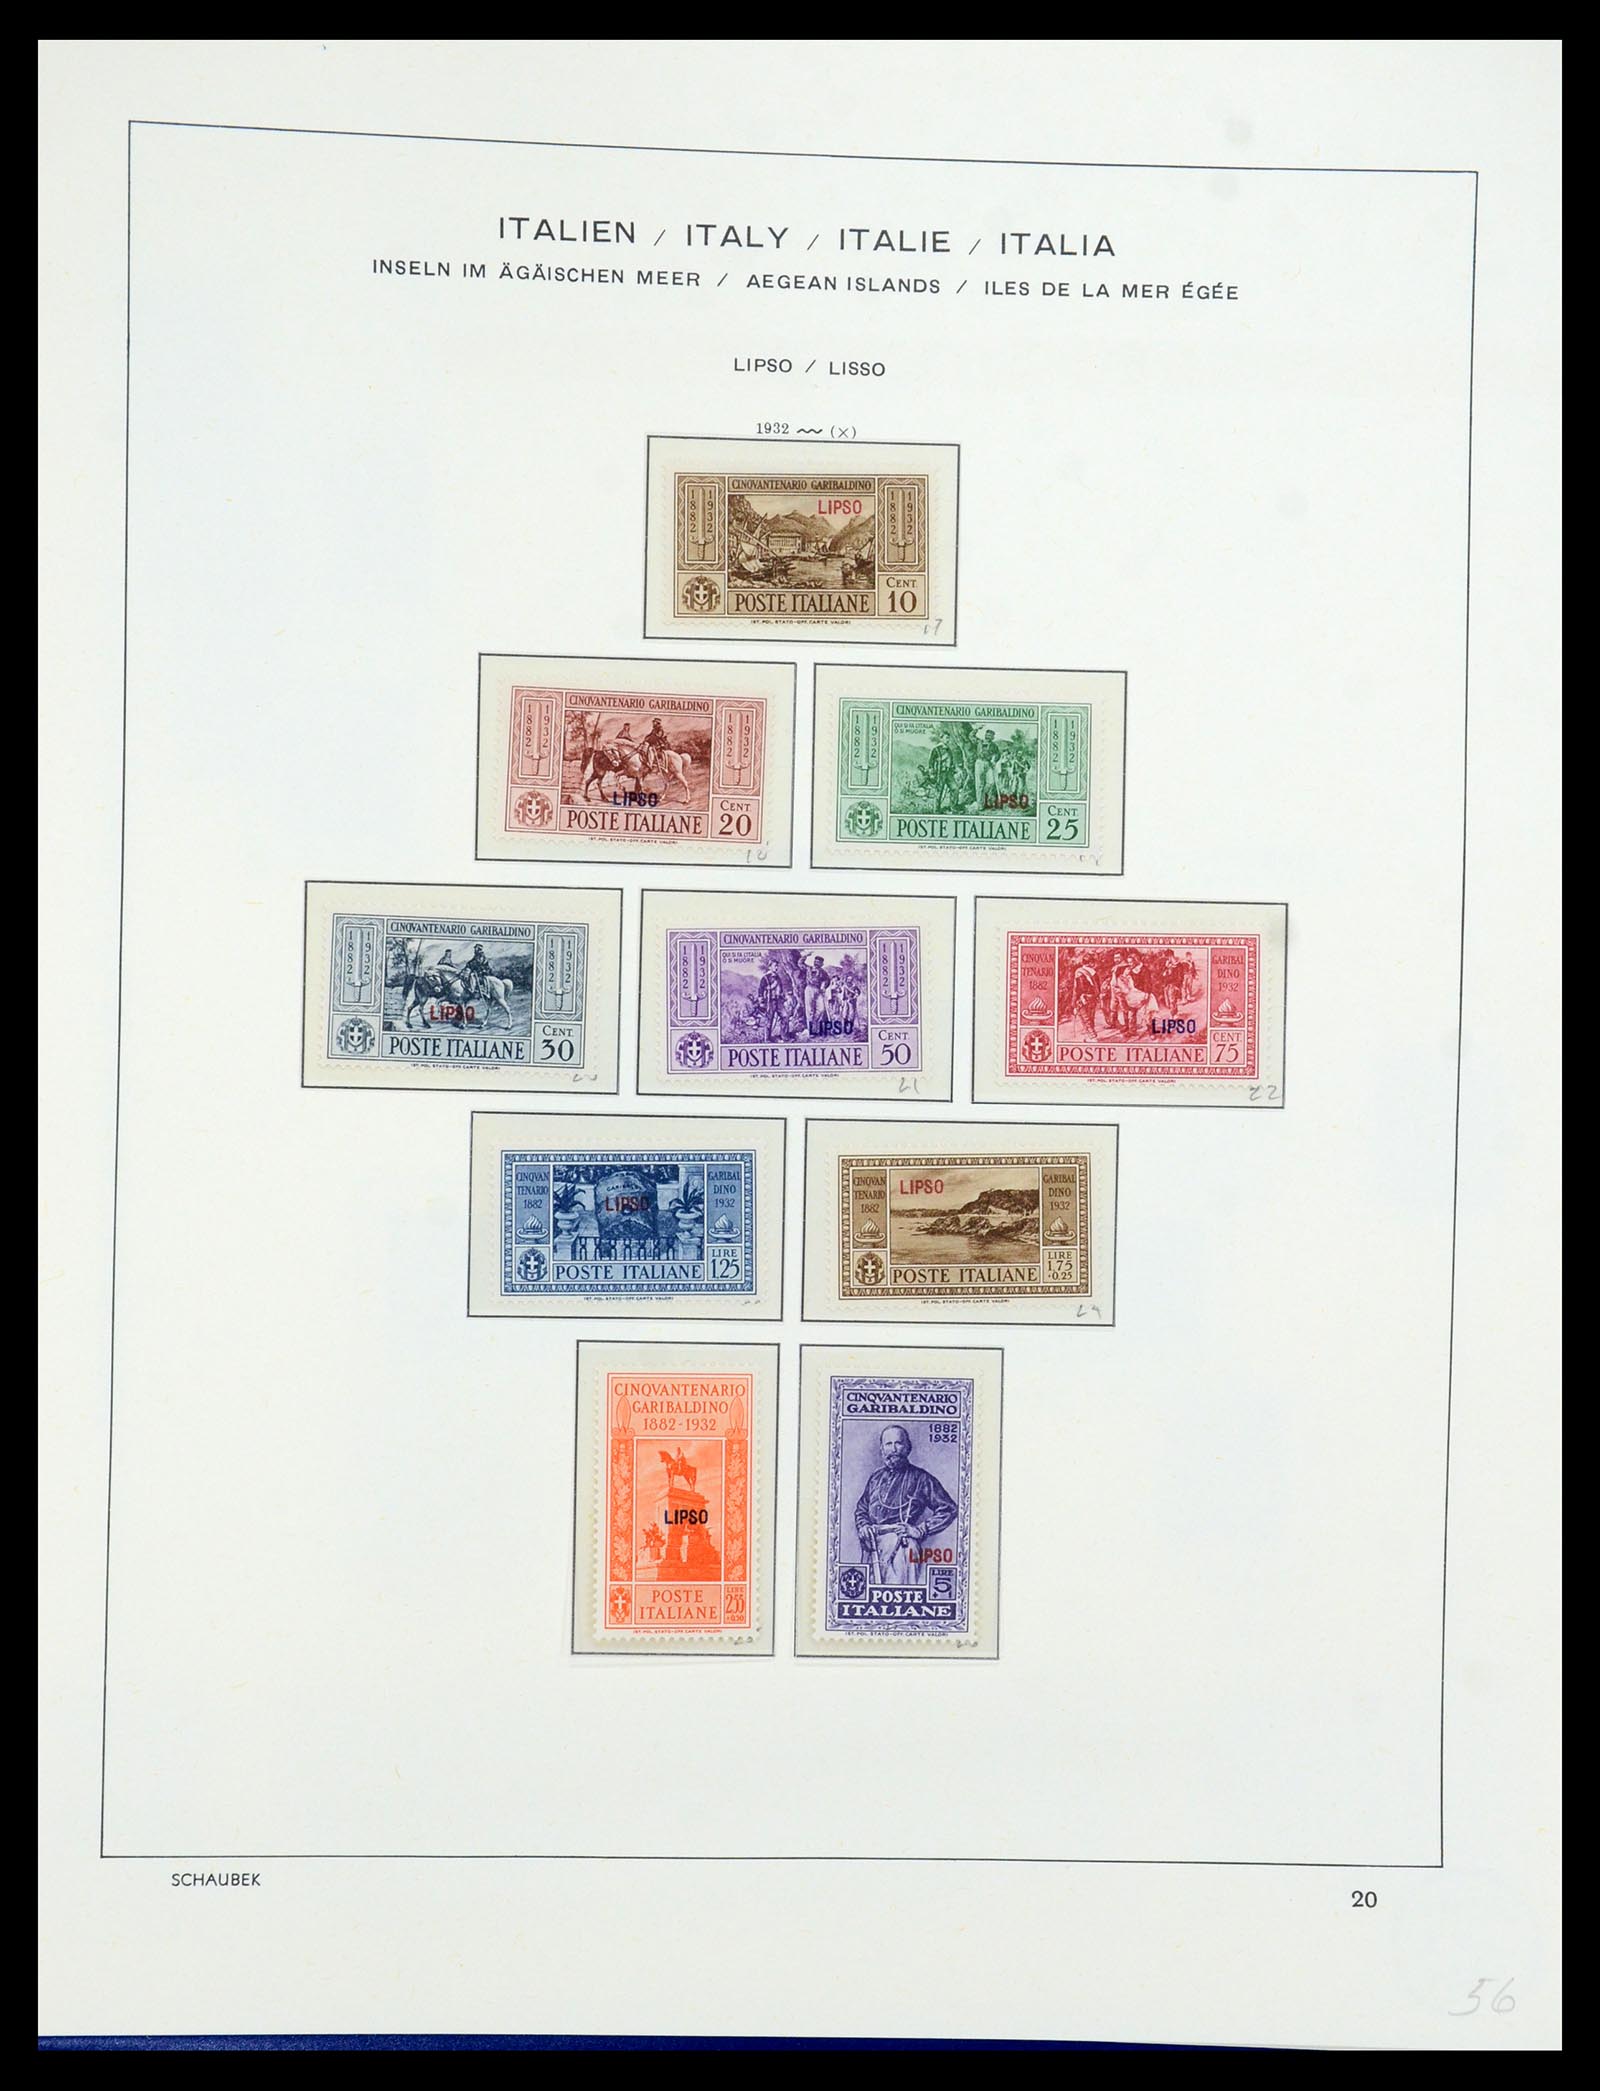 36181 025 - Stamp collection 36181 Italian Aegean Islands 1912-1941.